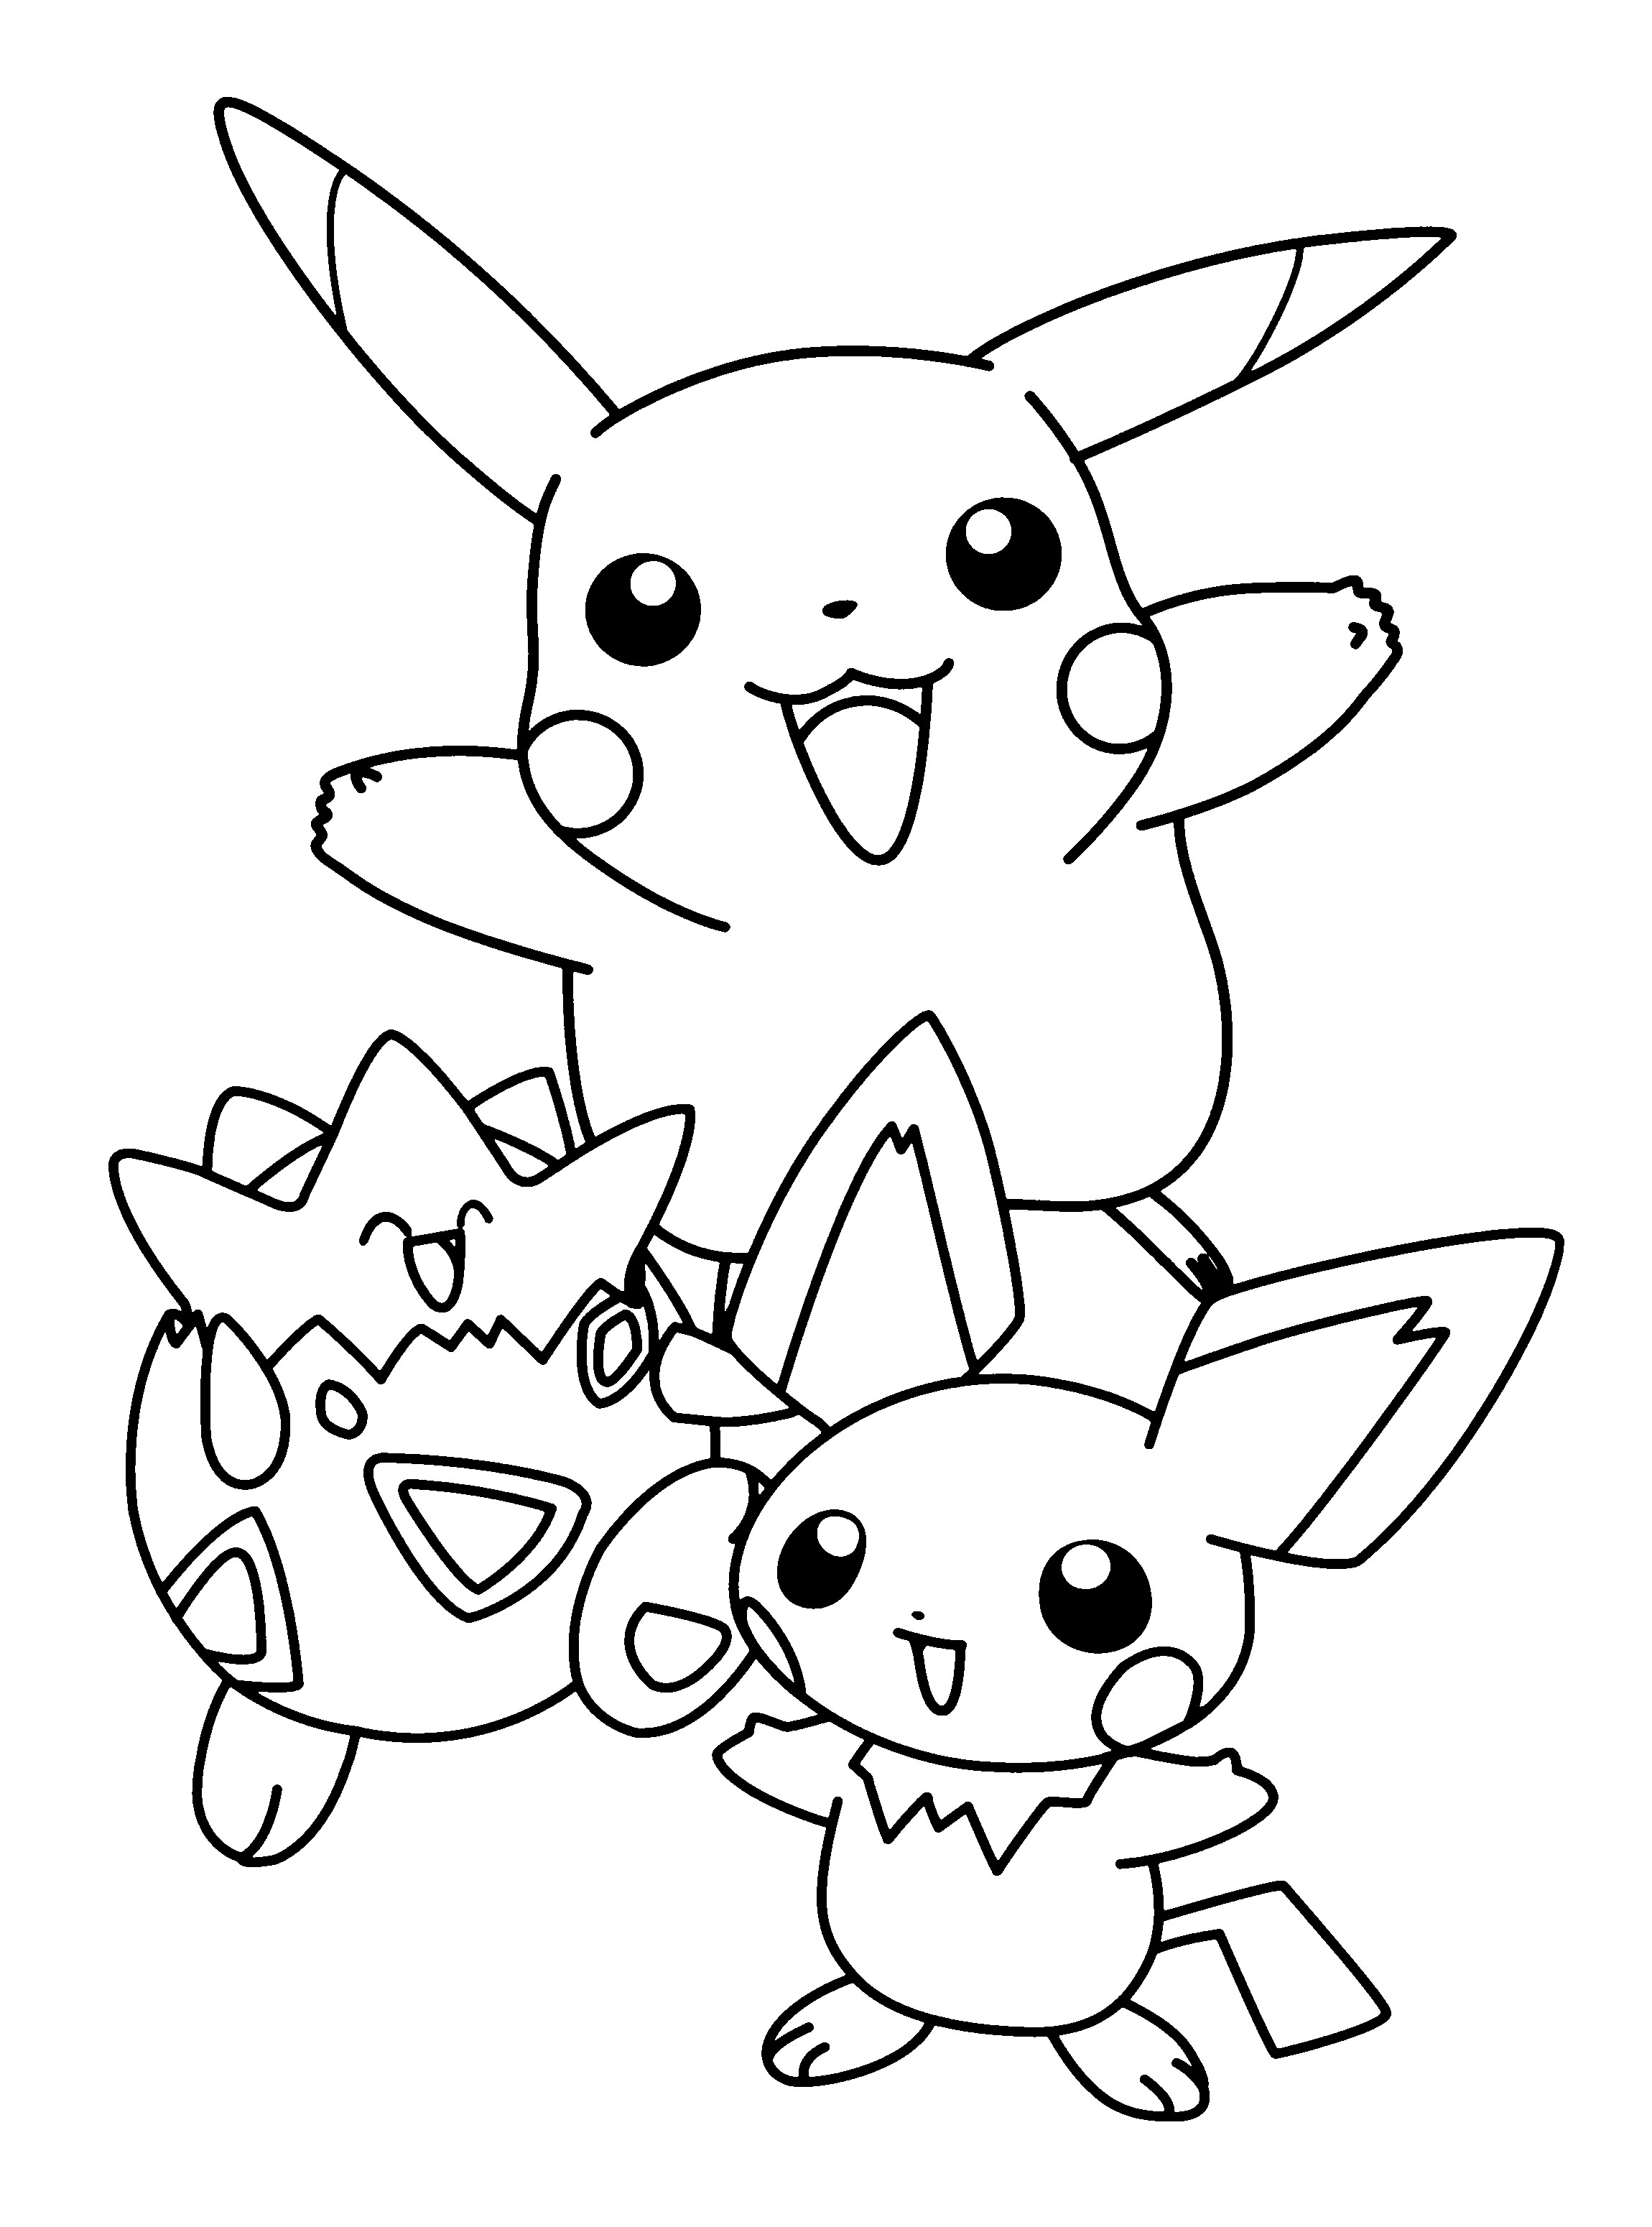 Pikachu and Charmander Coloring Pages Wallpaper